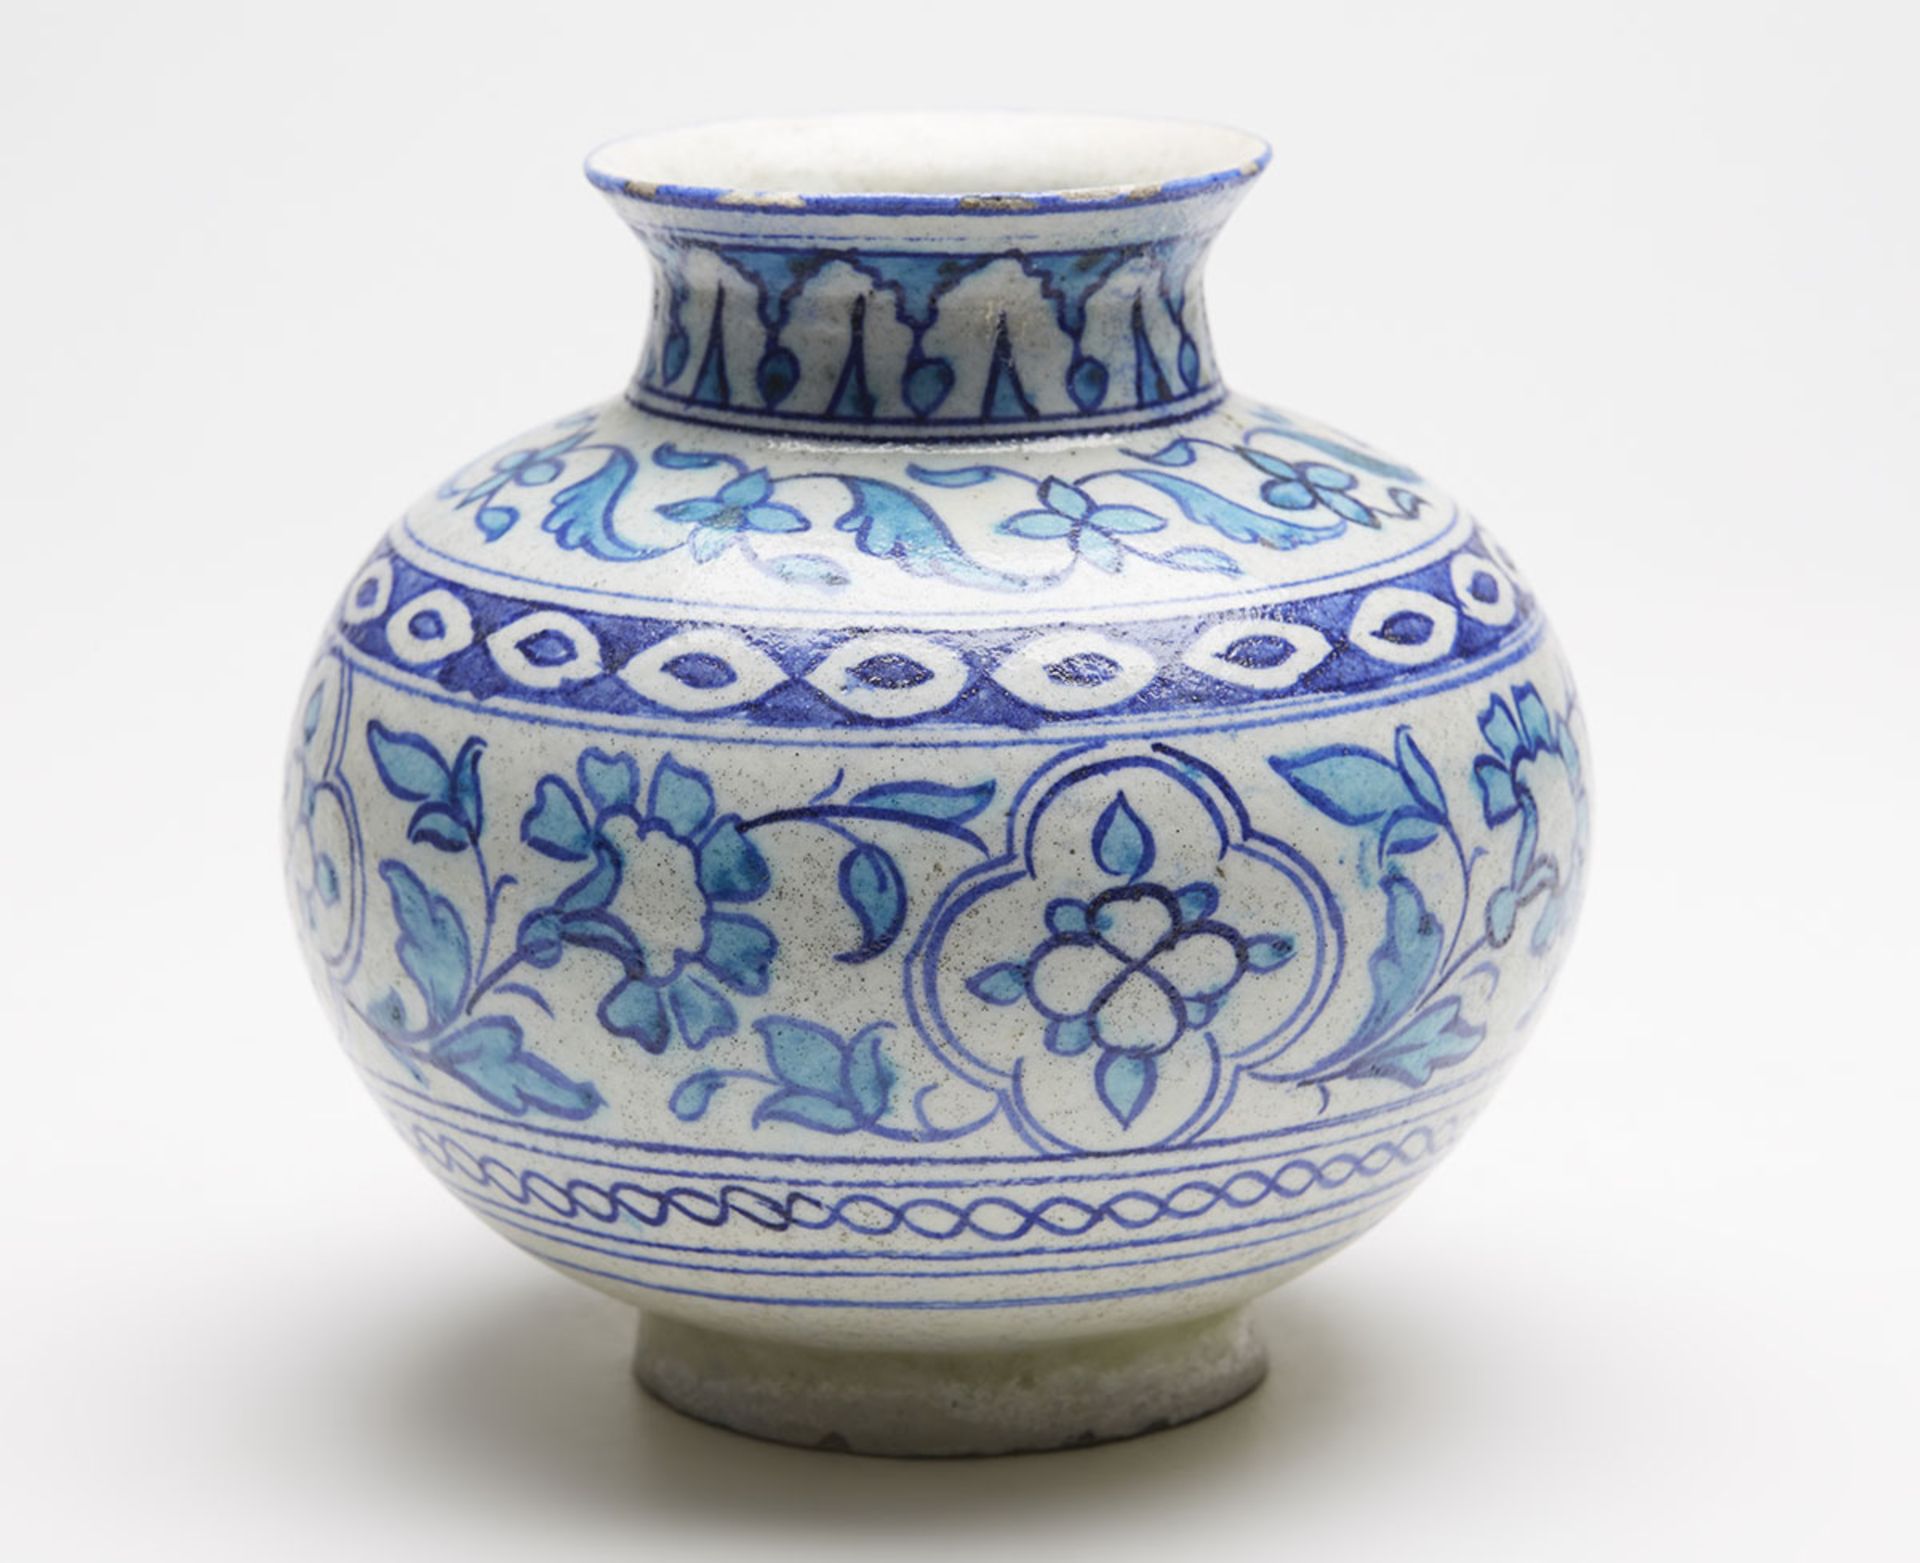 ANTIQUE MIDDLE EASTERN/INDIAN BLUE & WHITE VASE 19TH C.   DIMENSIONS   Height 13,5cm, Diameter 14,